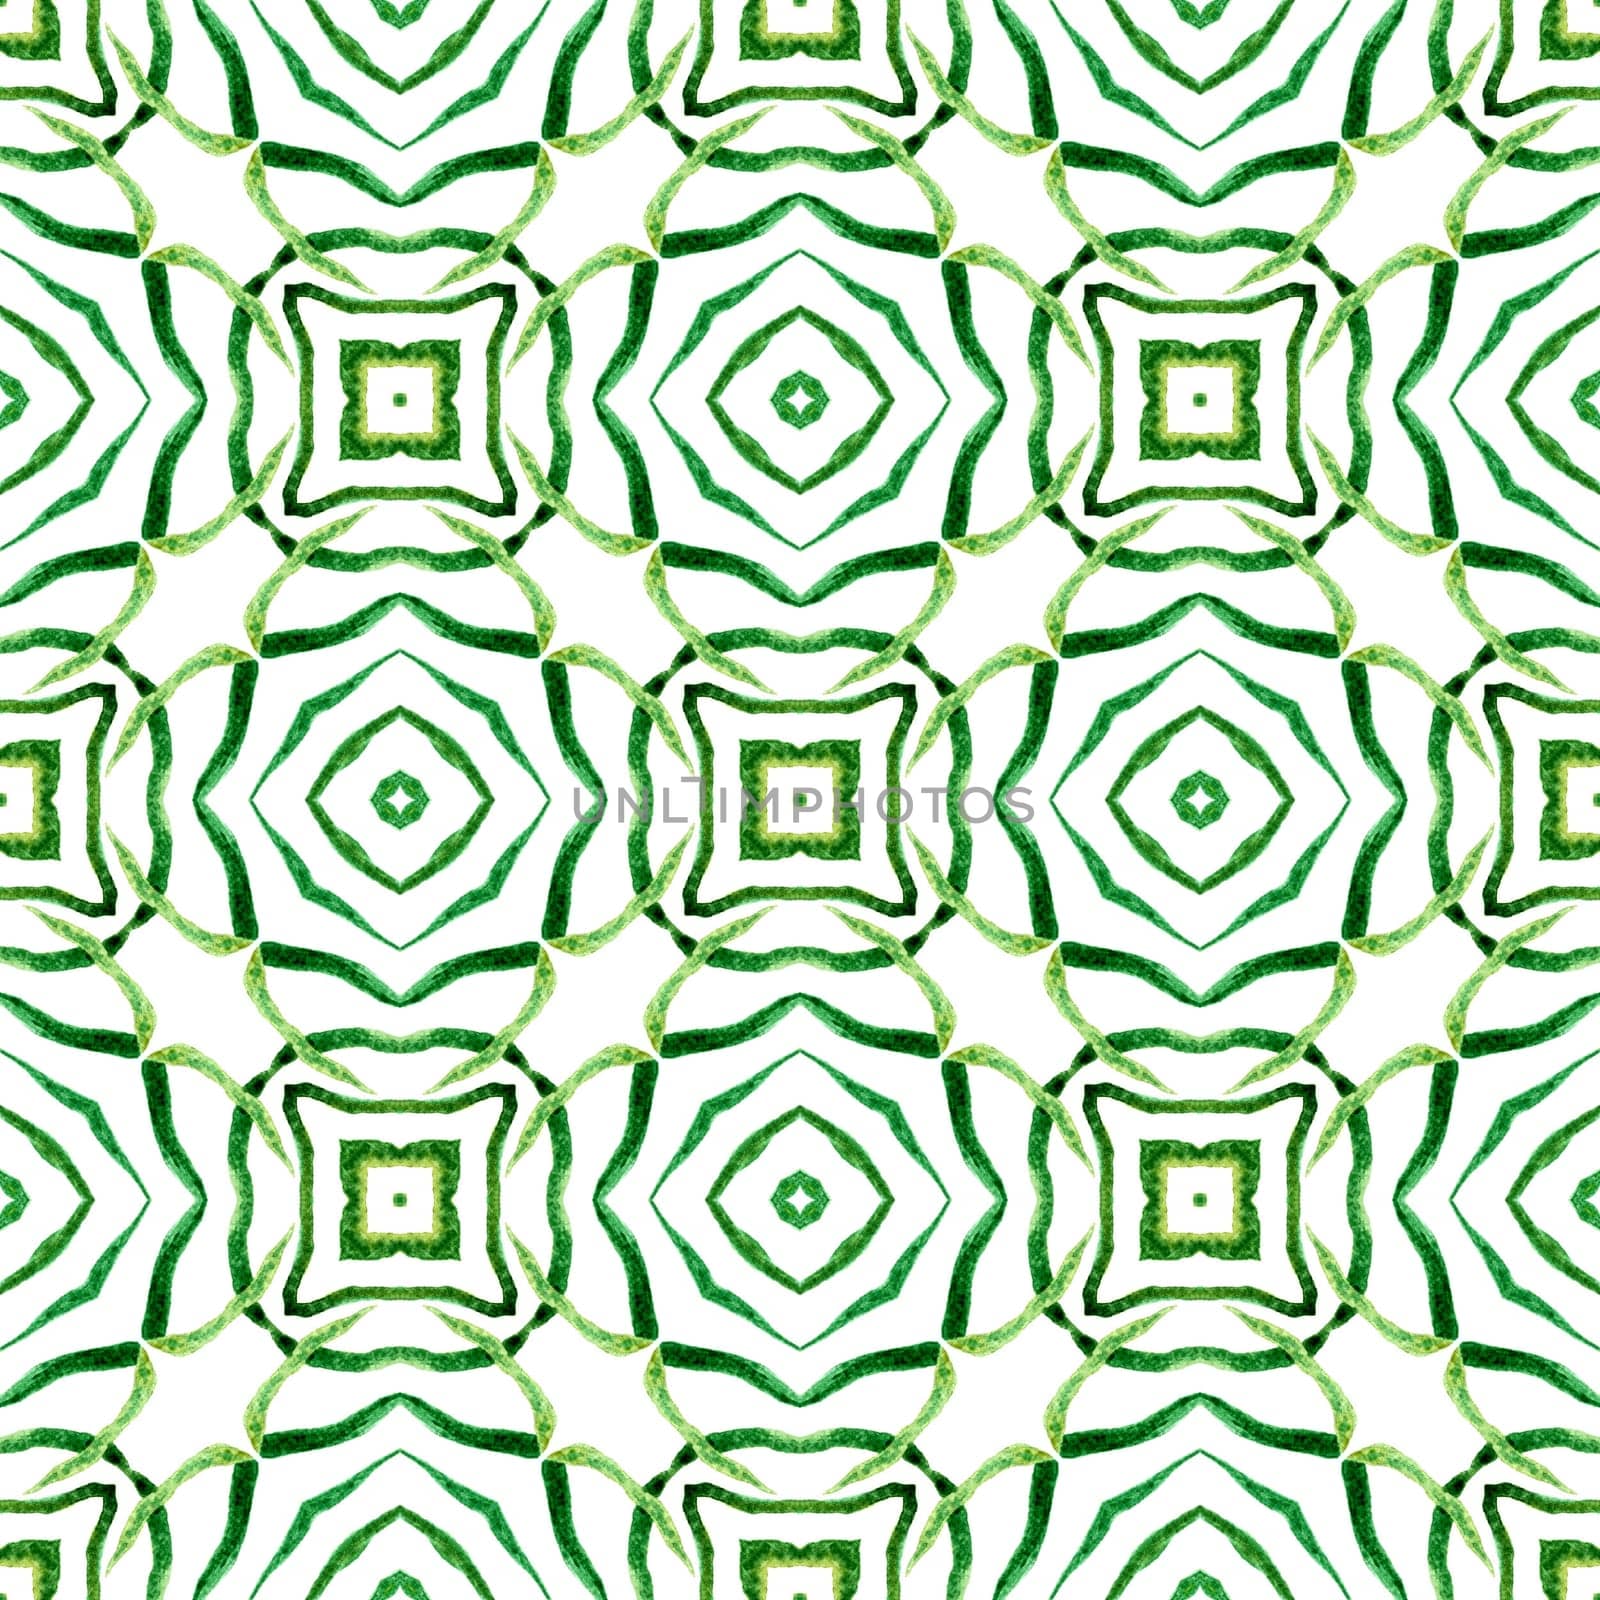 Tiled watercolor background. Green enchanting boho chic summer design. Textile ready great print, swimwear fabric, wallpaper, wrapping. Hand painted tiled watercolor border.